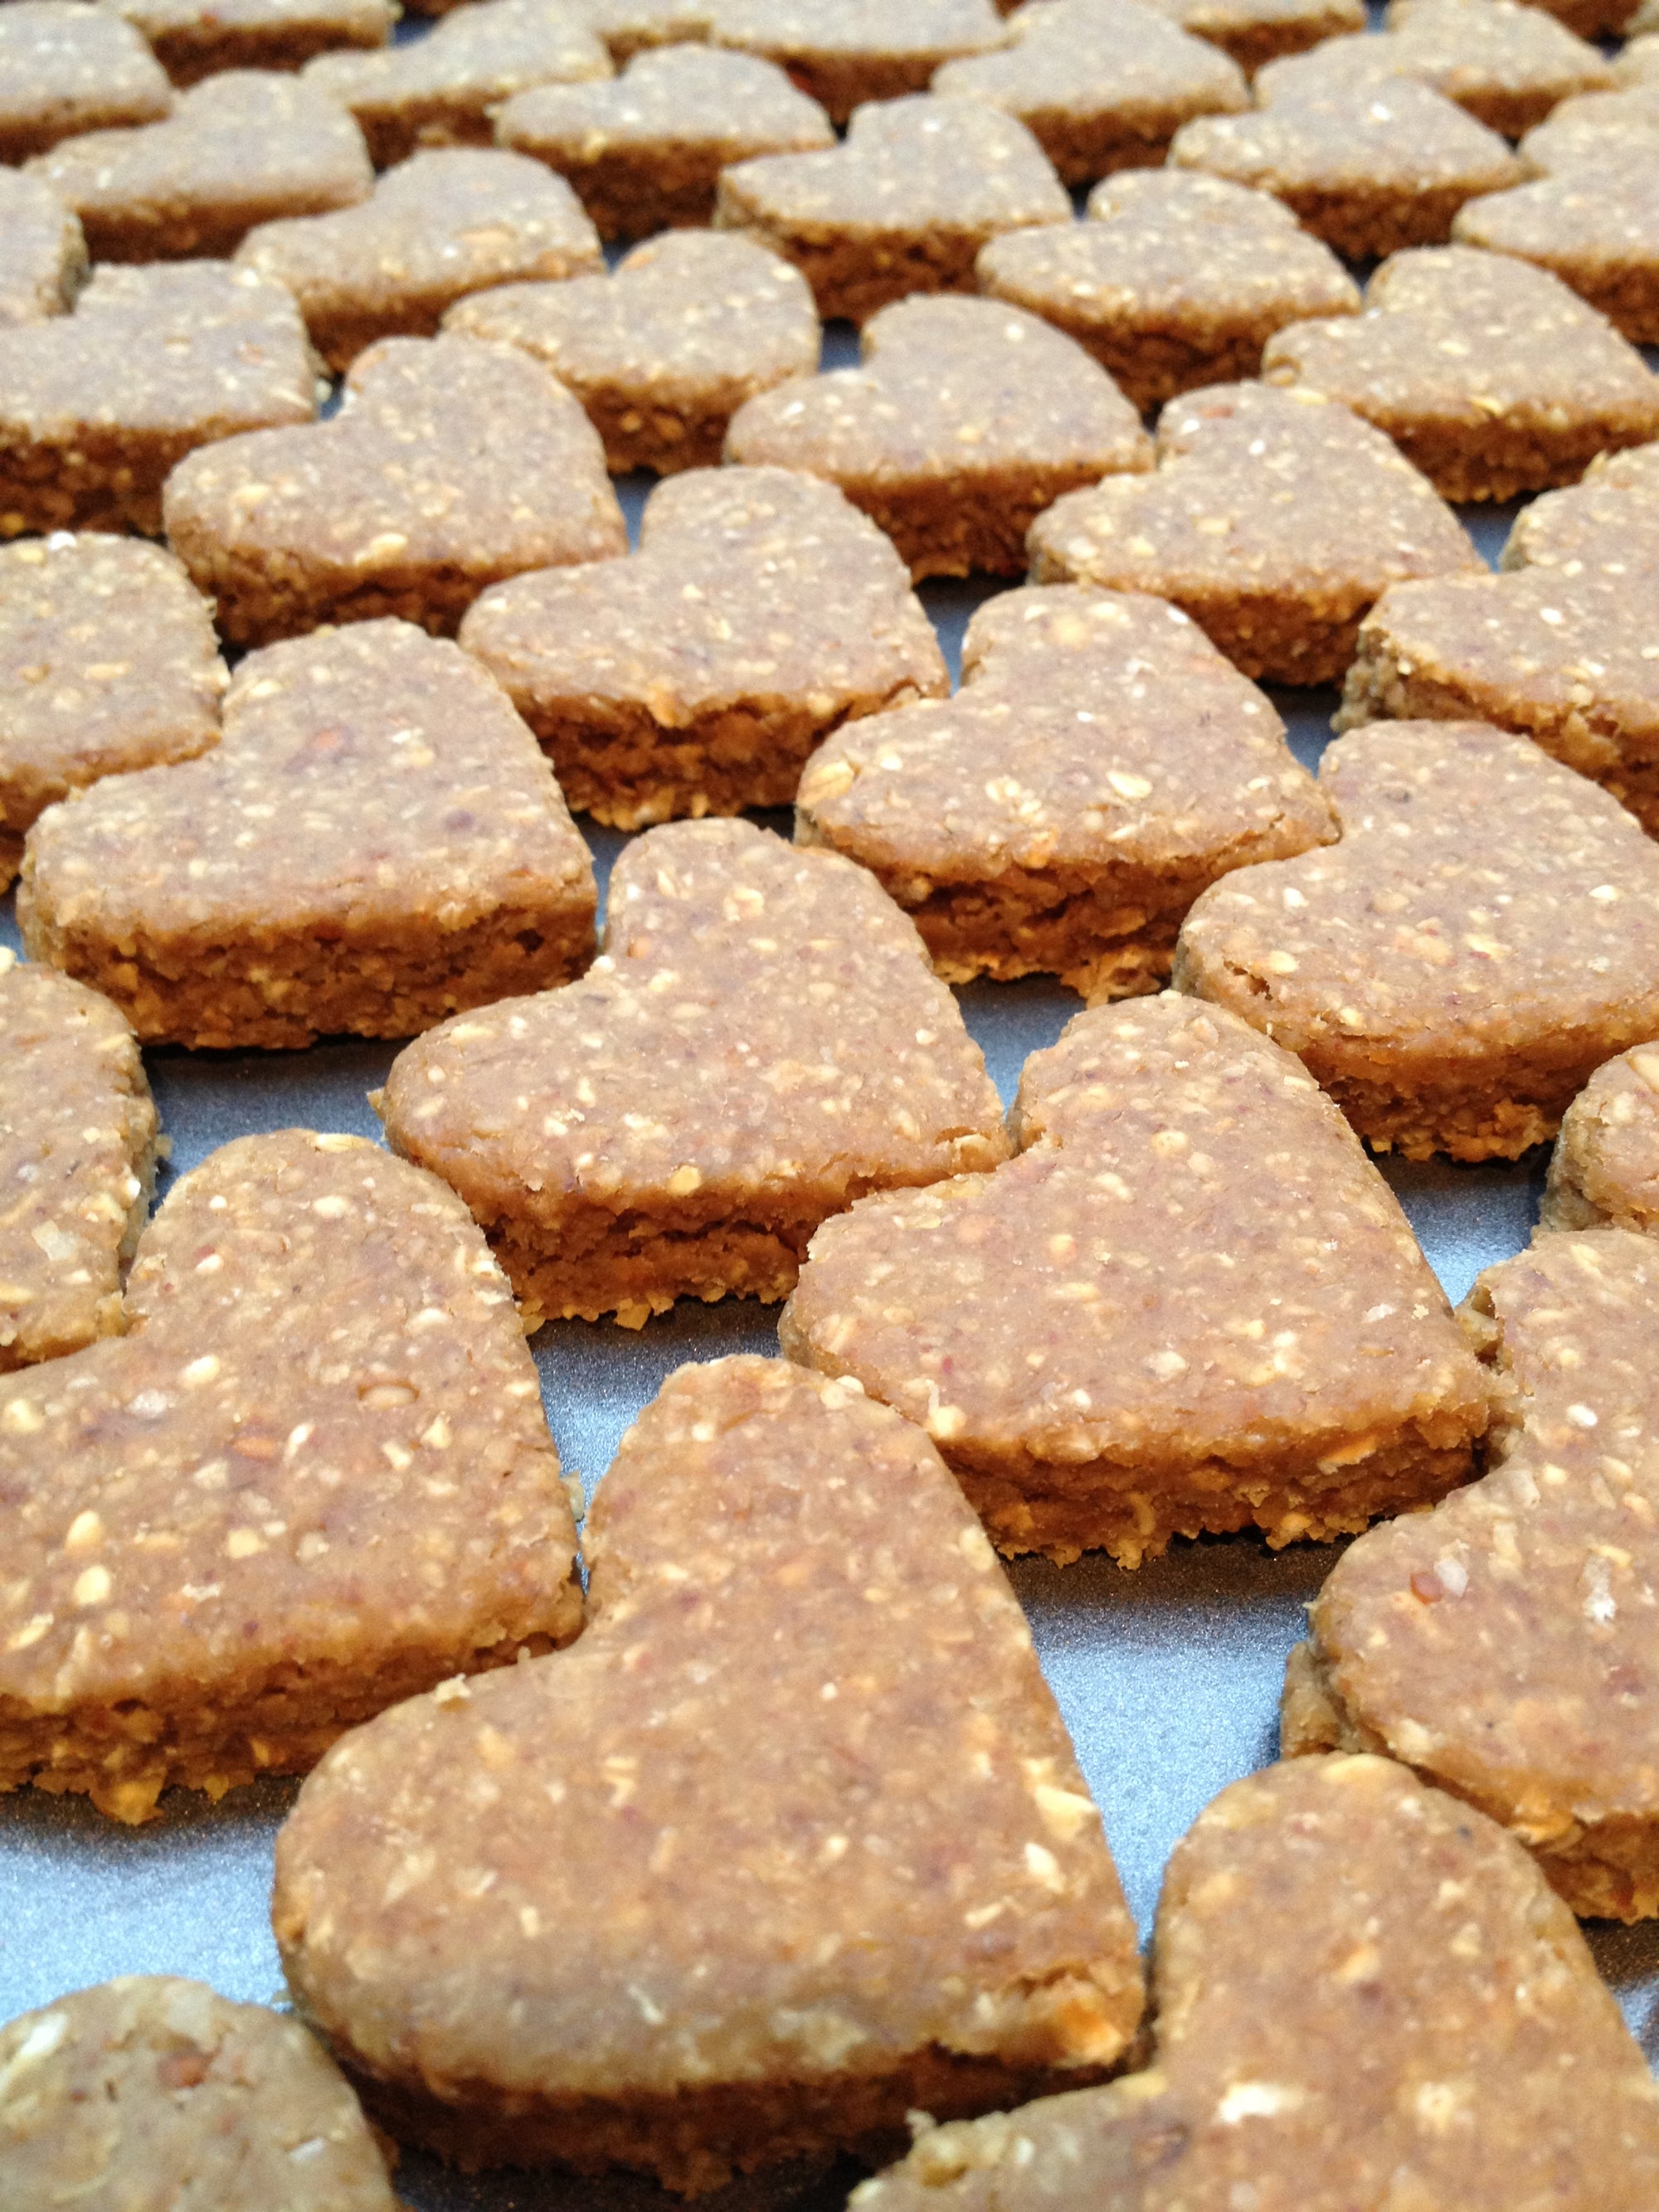 The Little Pet Biscuit Company handmade peanut butter and banana dog biscuits. Natural dog treats. Dog biscuits